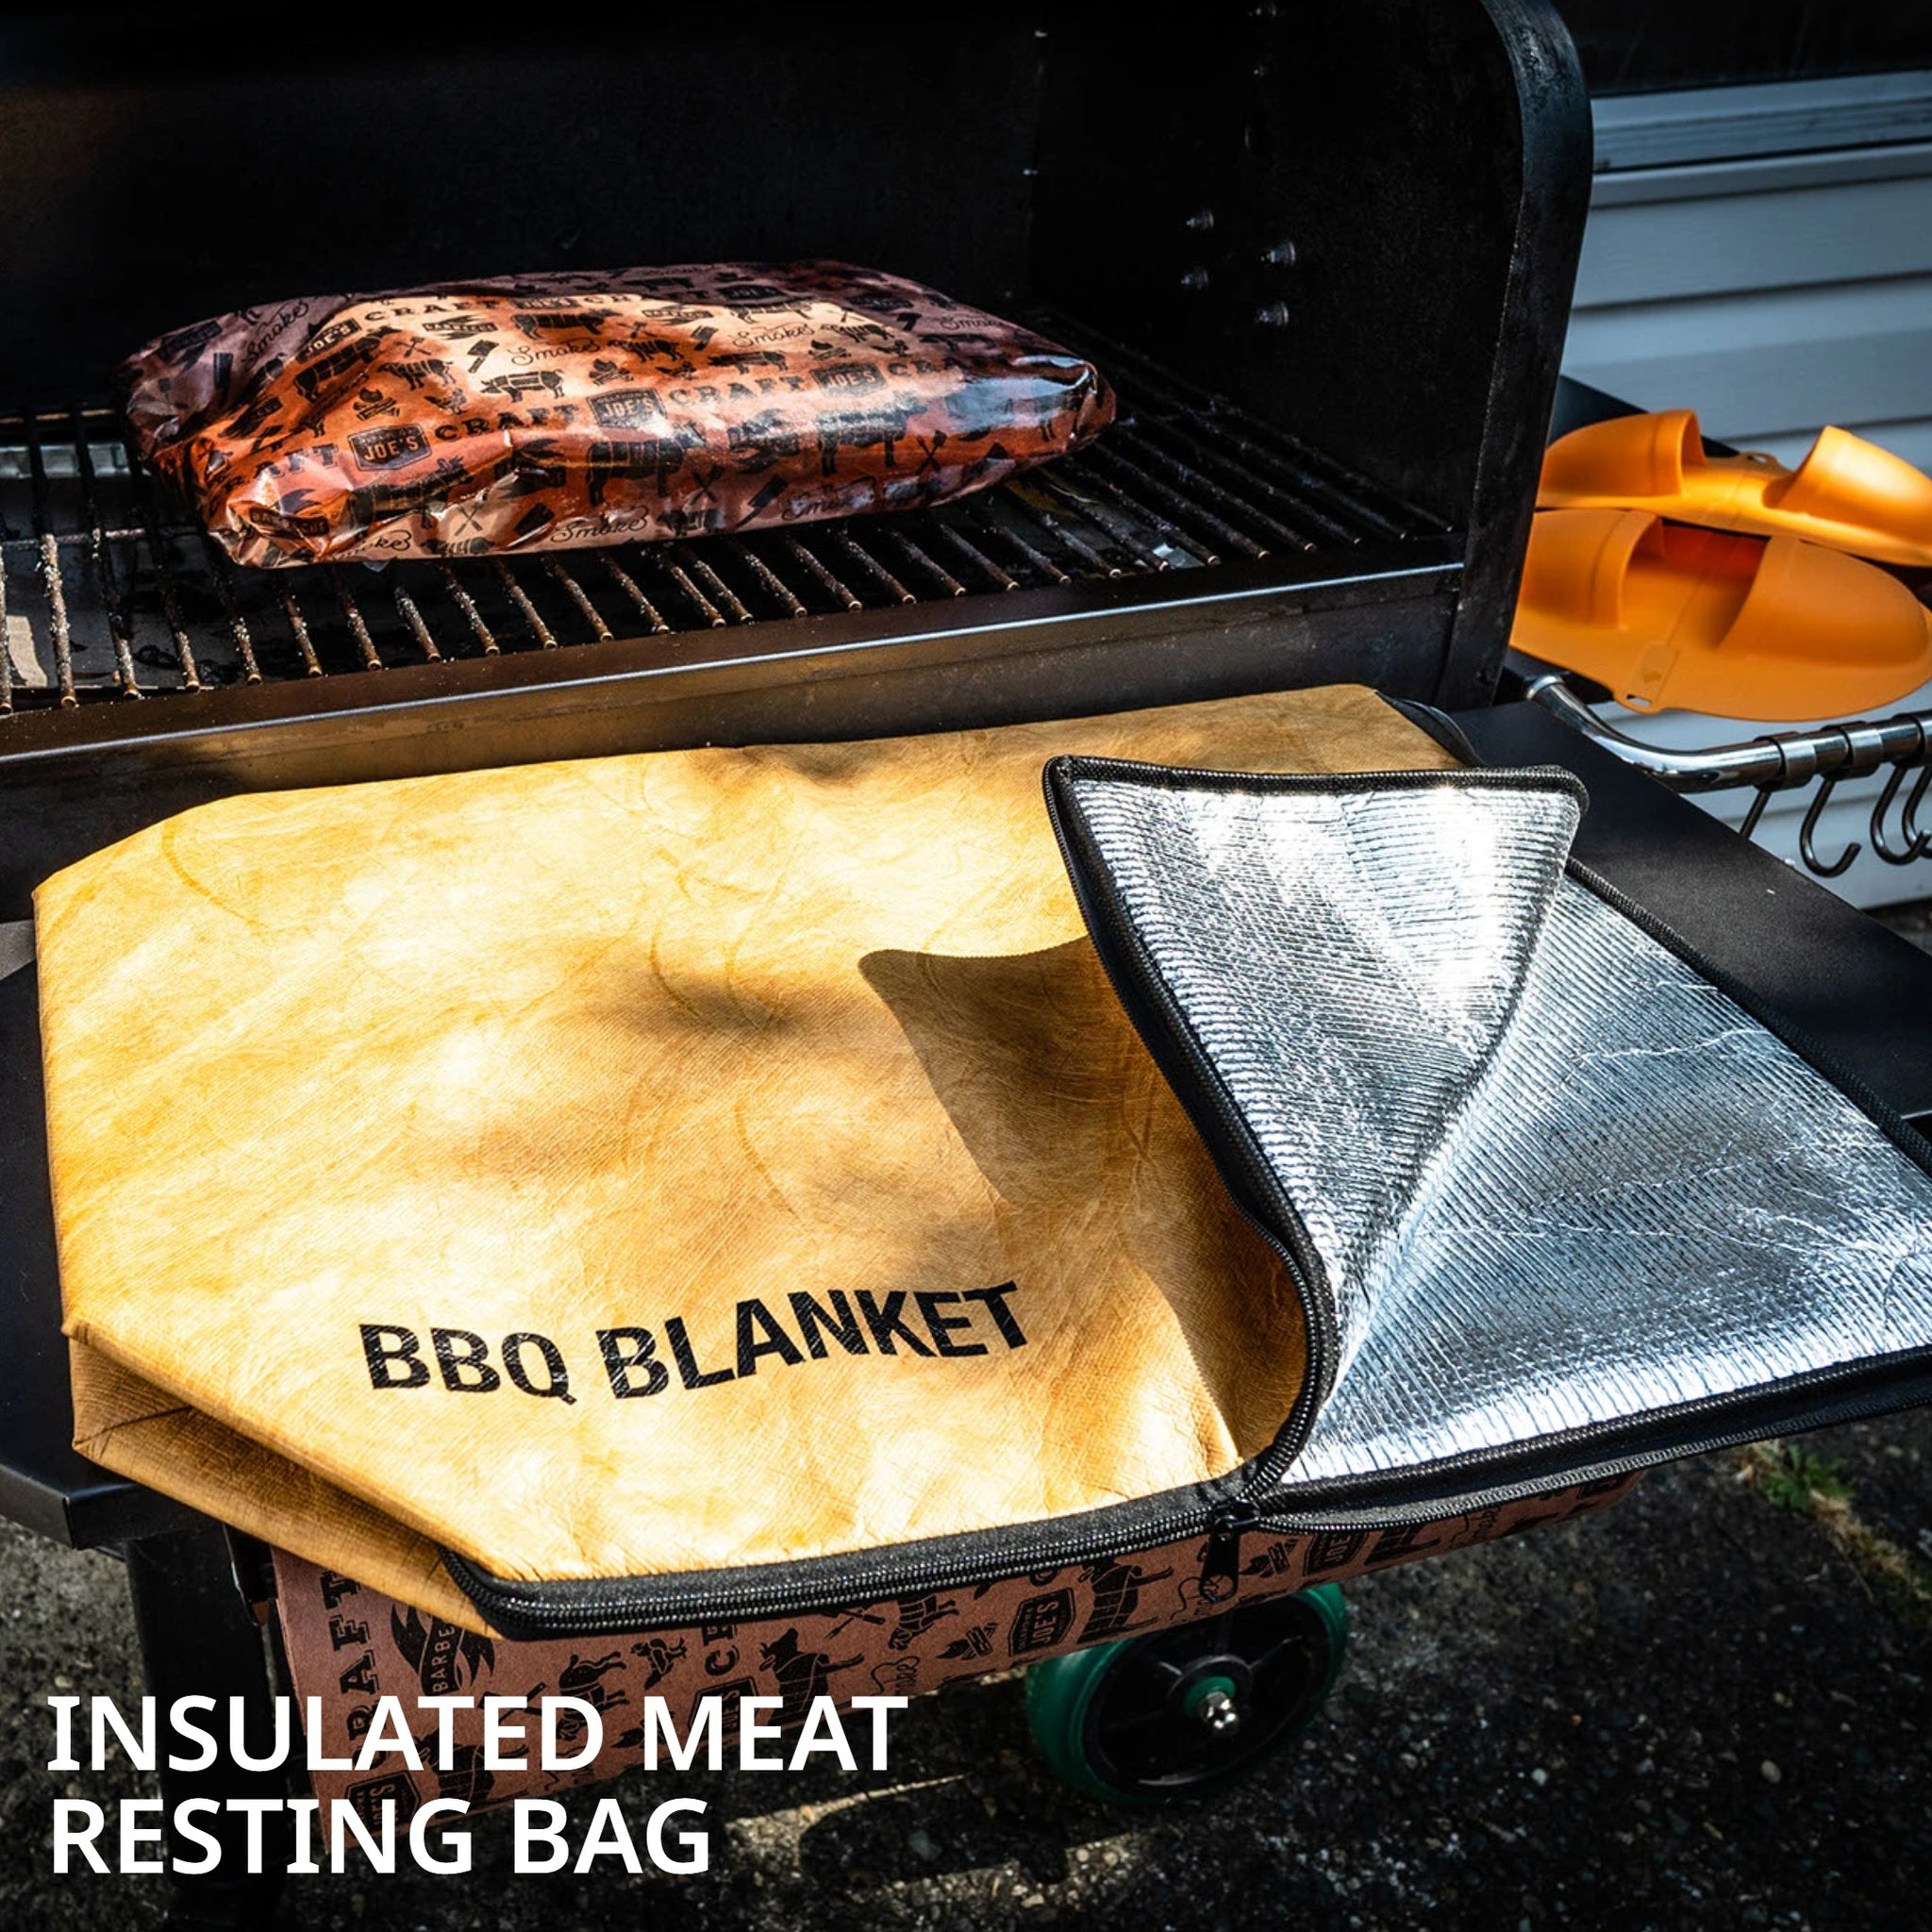 Check my gear page for 15% off the REST EZ BBQ Blanket and Prep